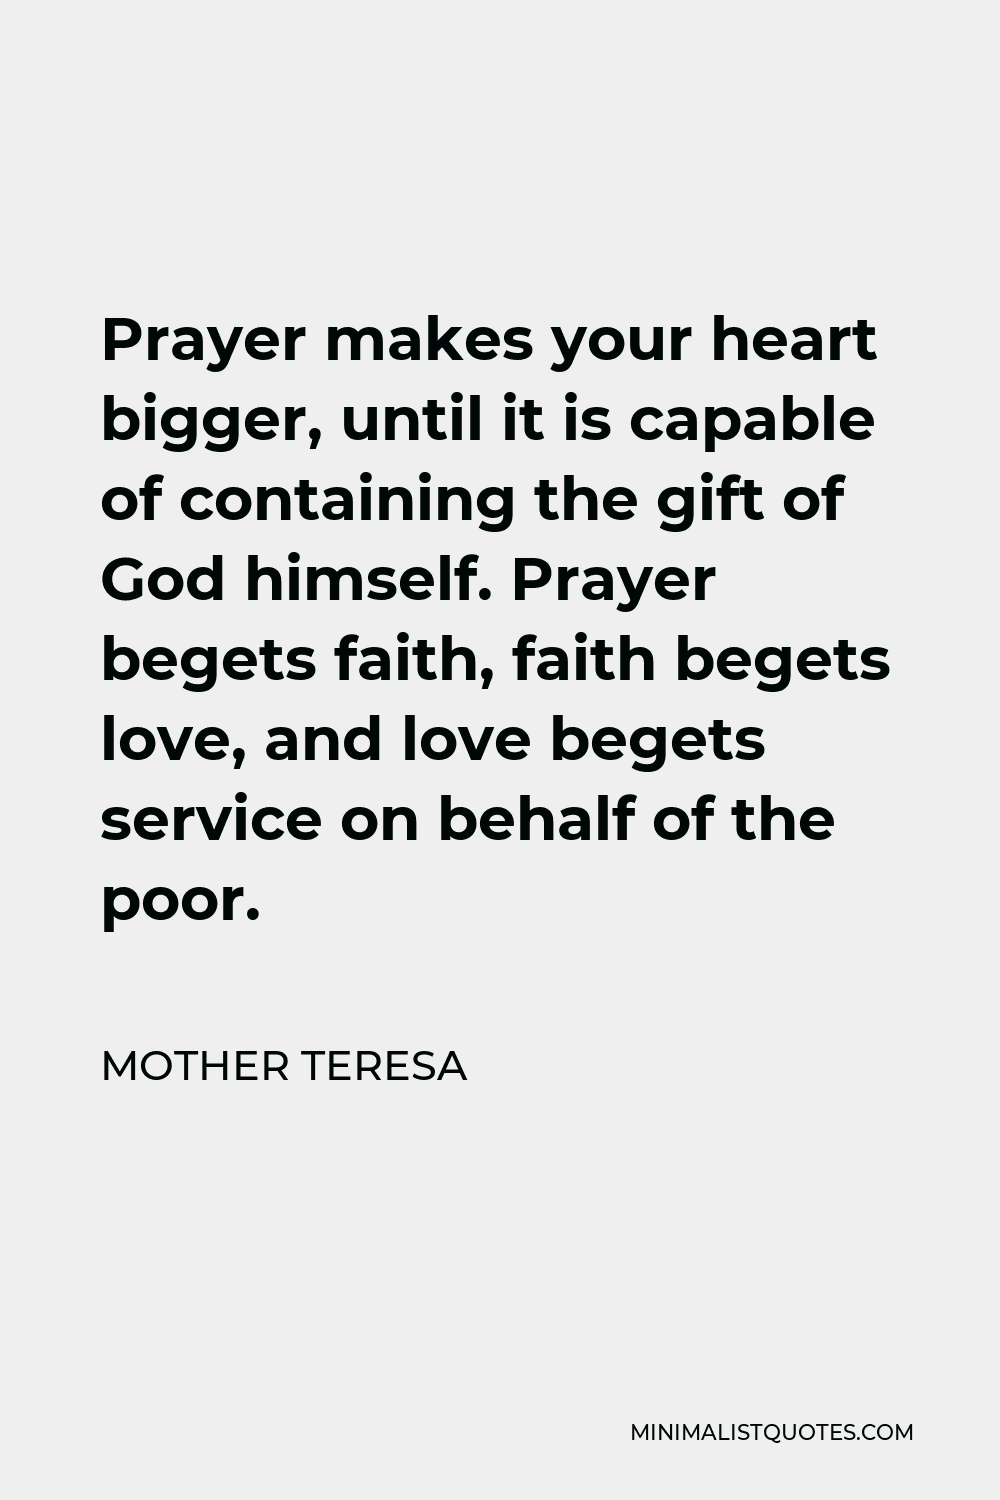 Mother Teresa Quote - Prayer makes your heart bigger, until it is capable of containing the gift of God himself. Prayer begets faith, faith begets love, and love begets service on behalf of the poor.